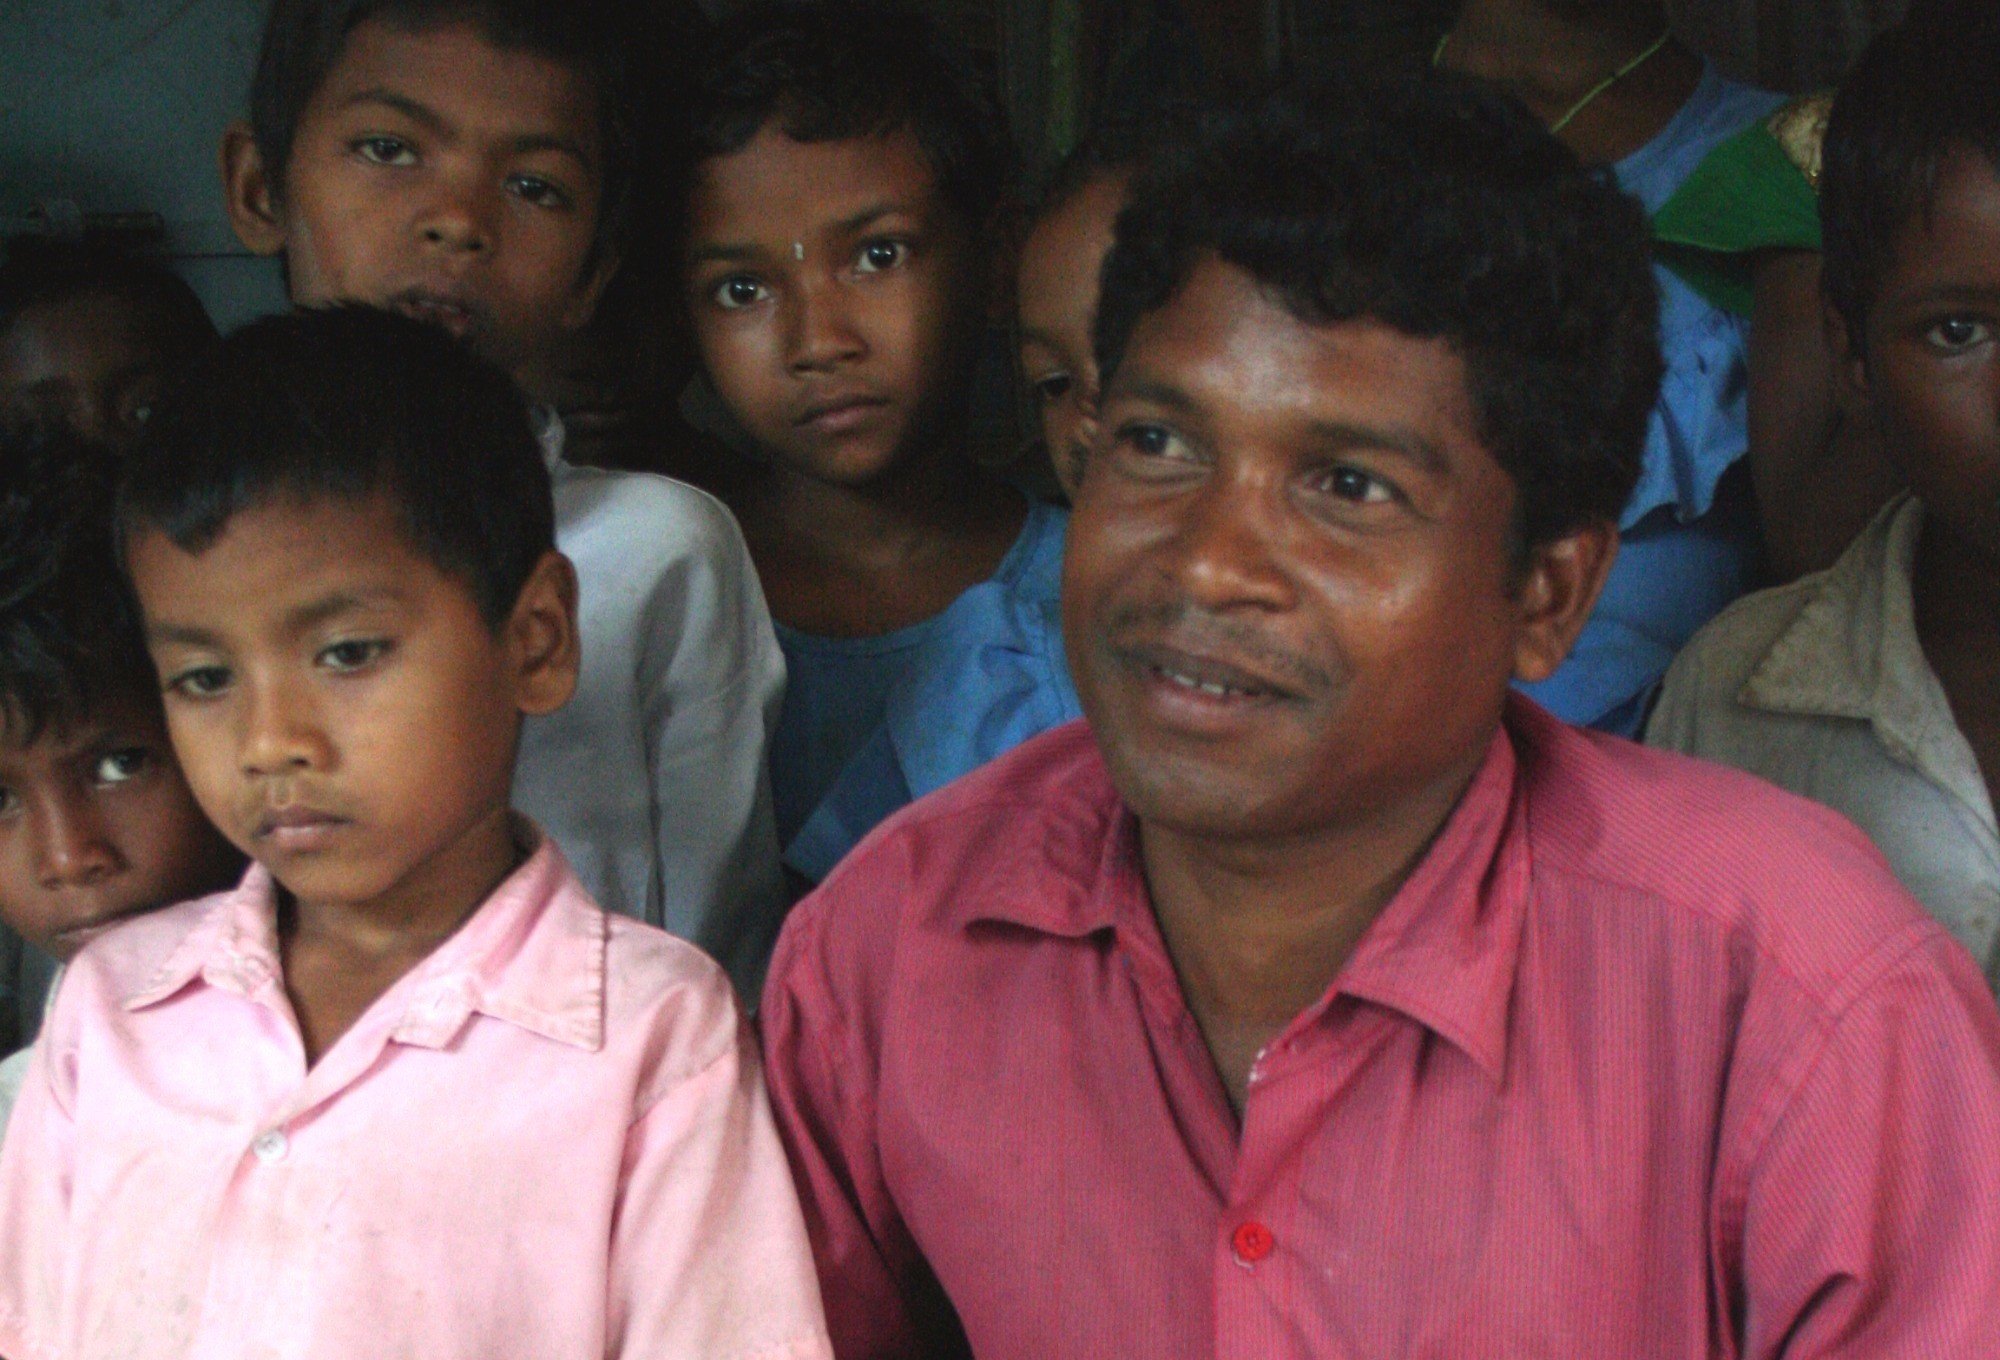 A man in a red shirt smiling. Several children surround him.